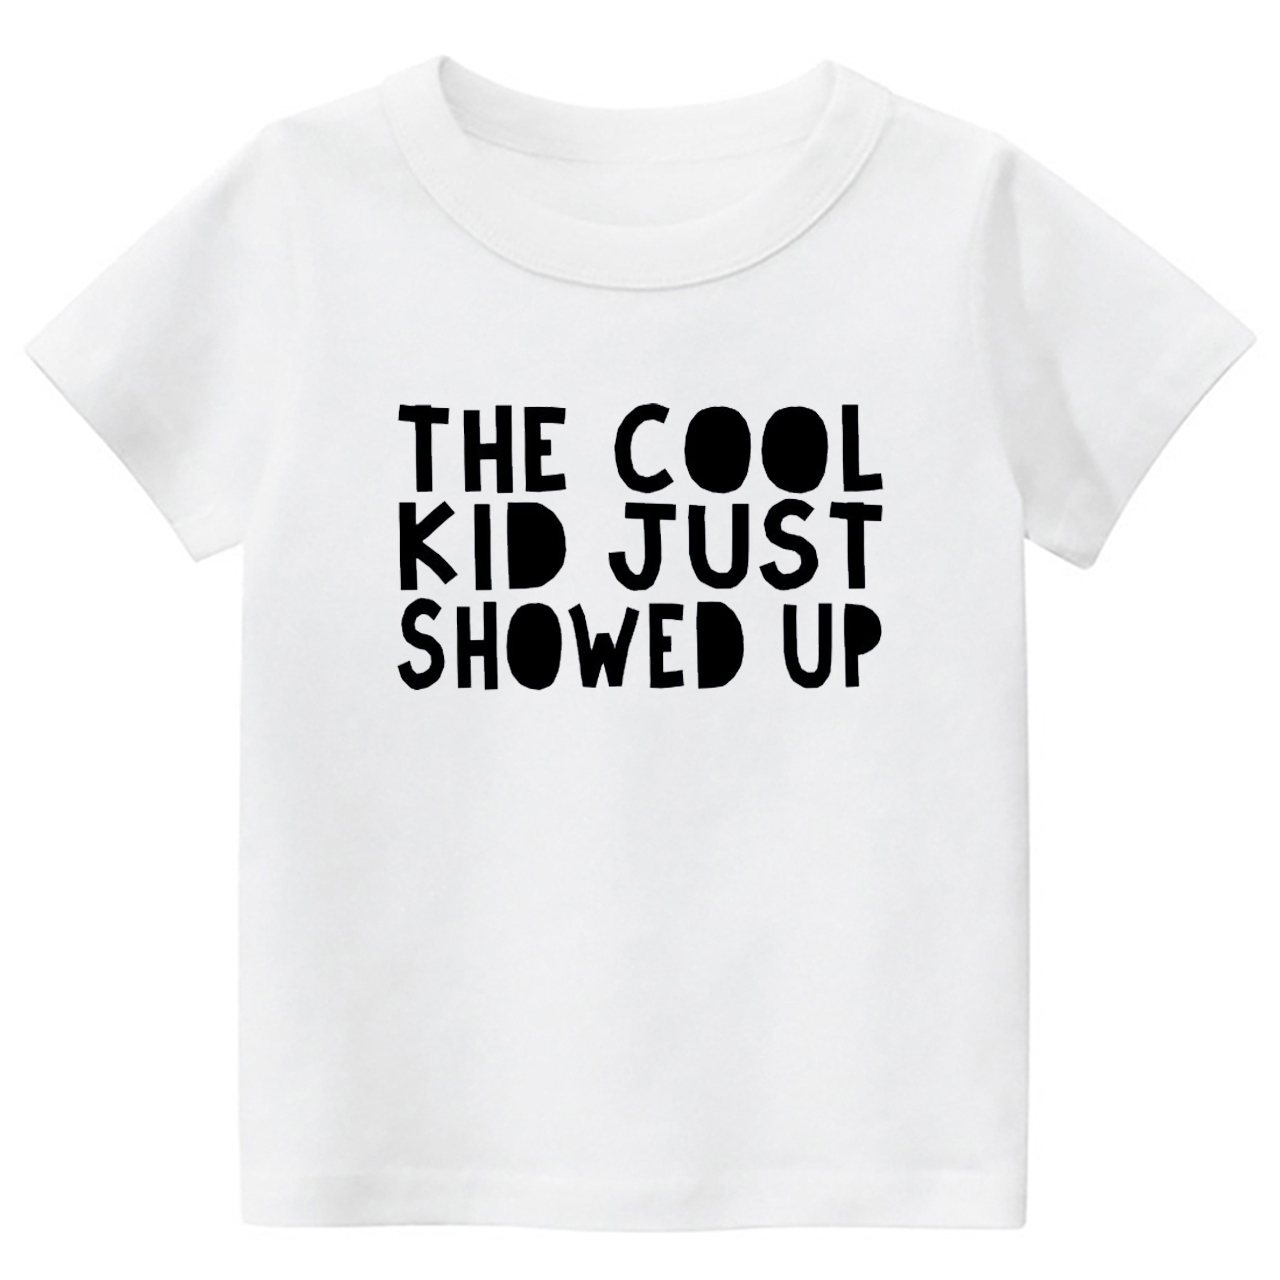 The Cool Kid Just Showed Up Kids Shirts